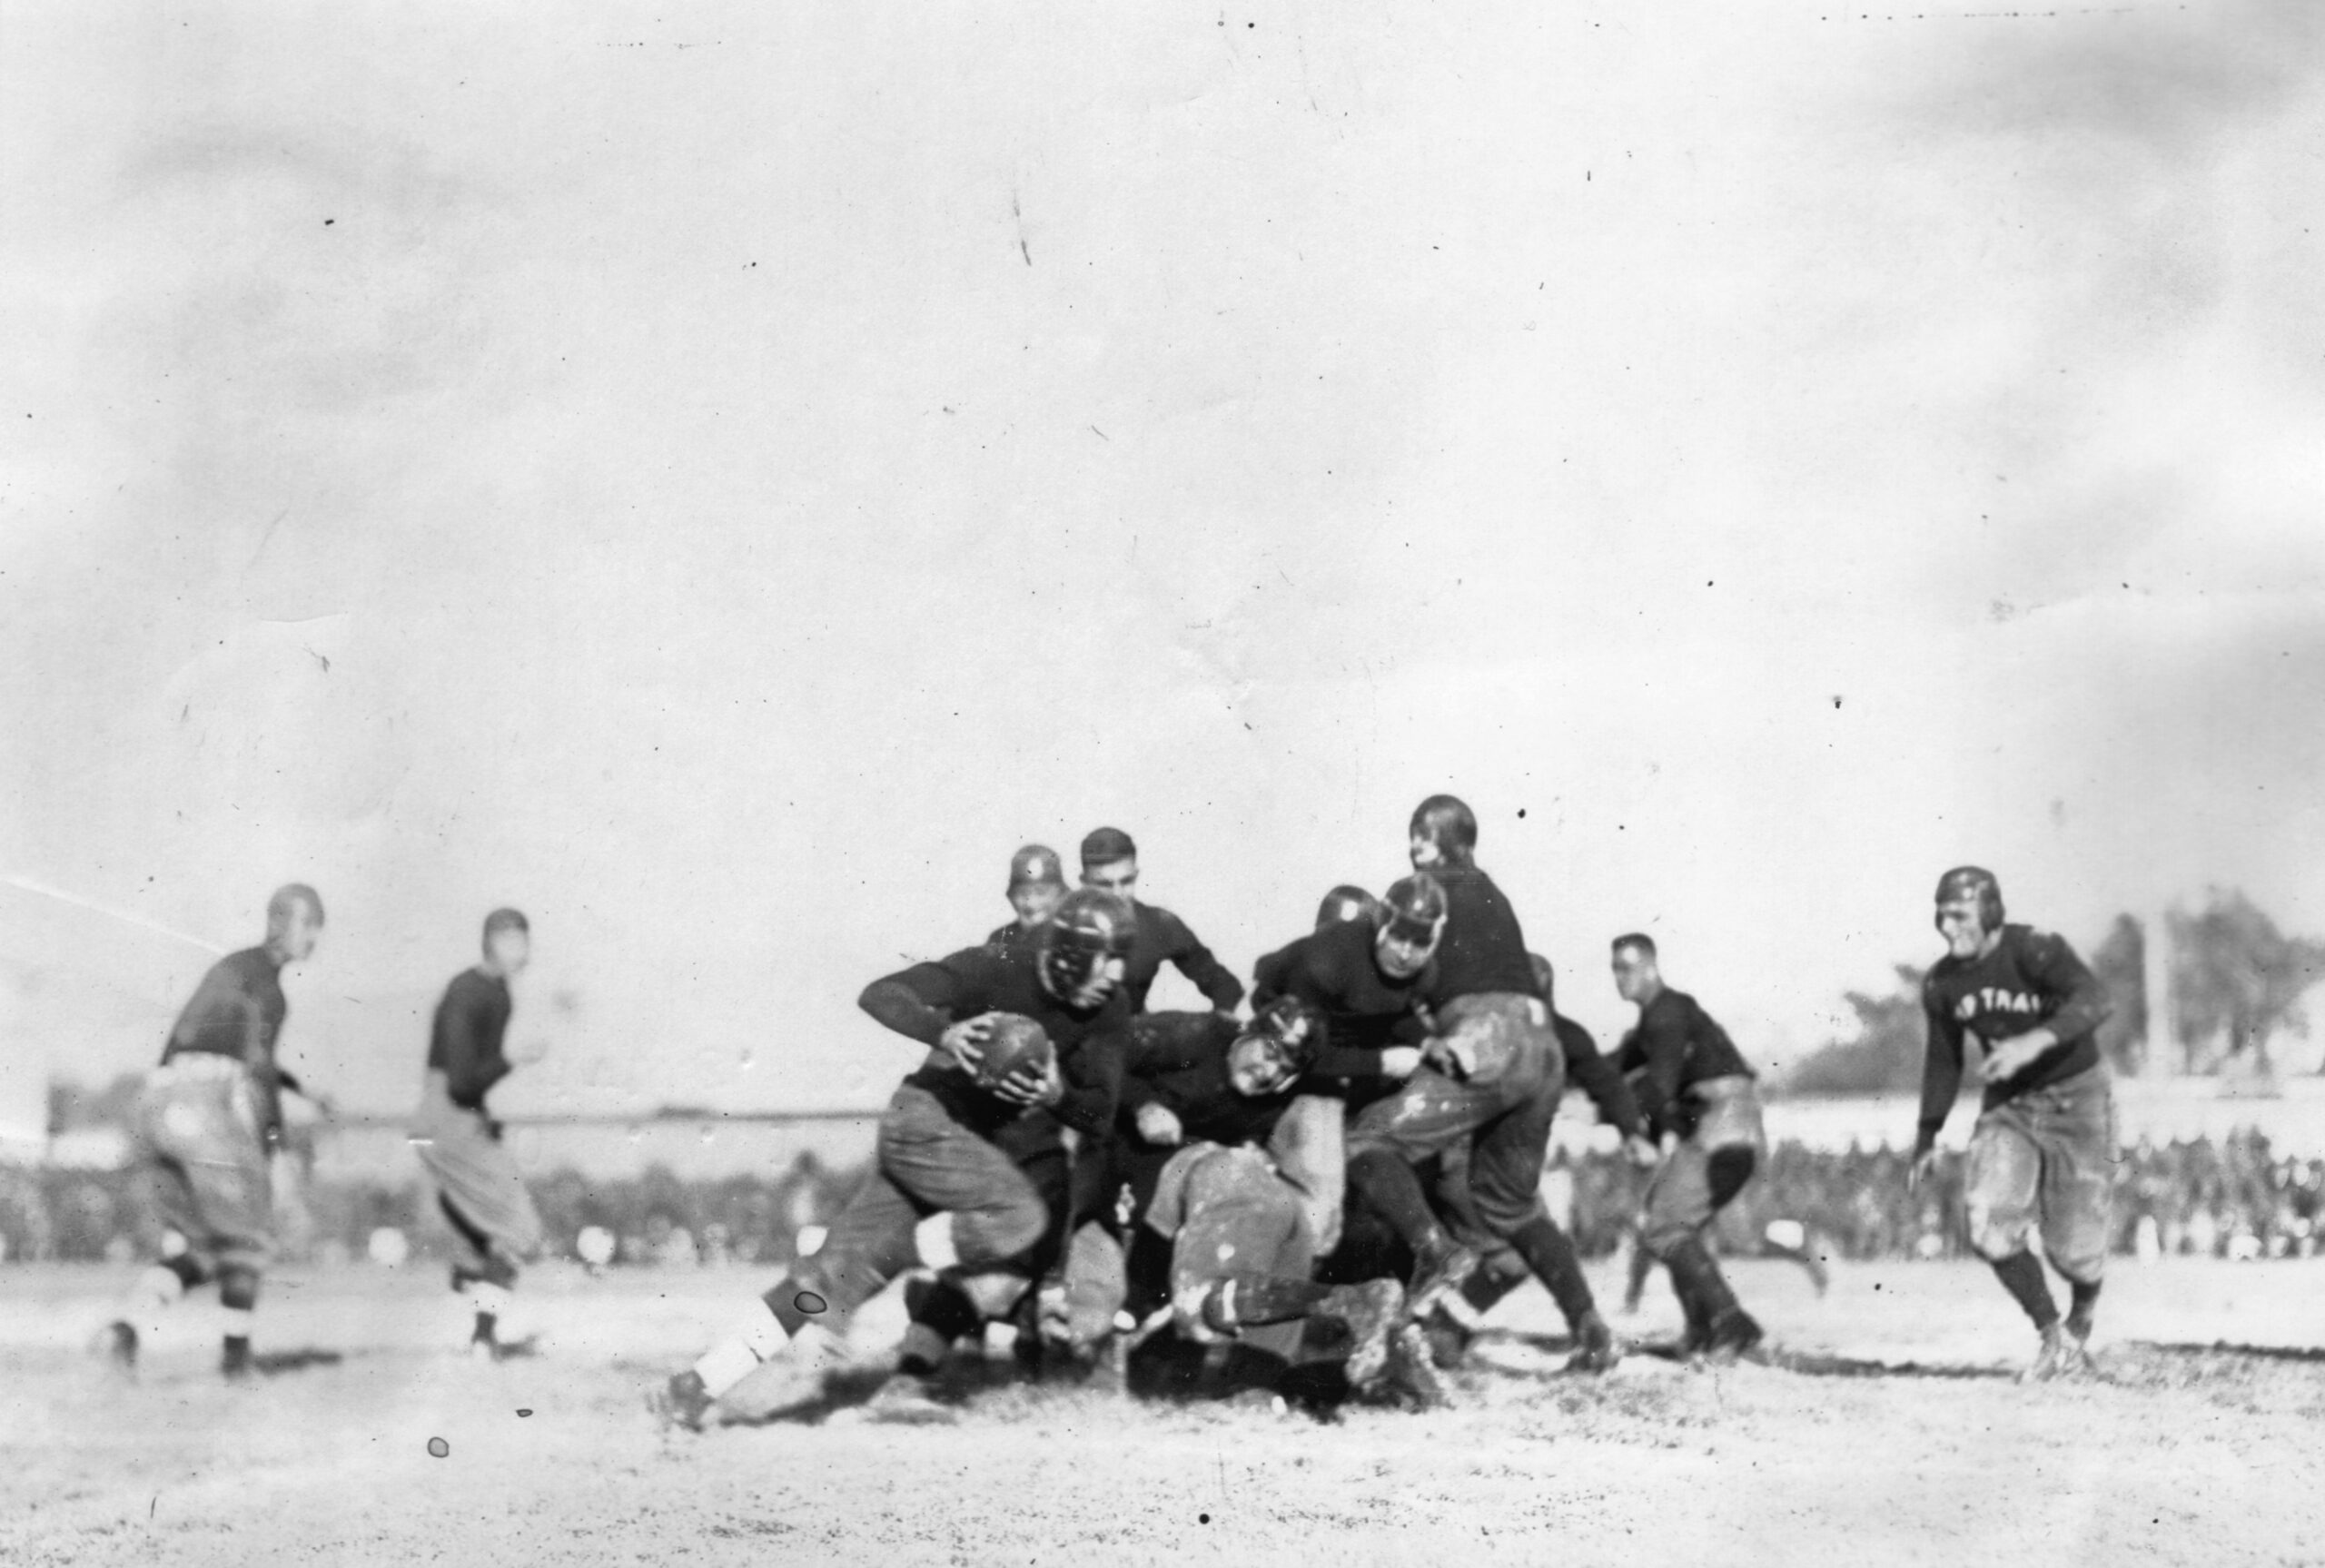 Former POWCamp Travis Thanksgiving game, 1918s cheer on their way home – National Archives Identifier: 532510